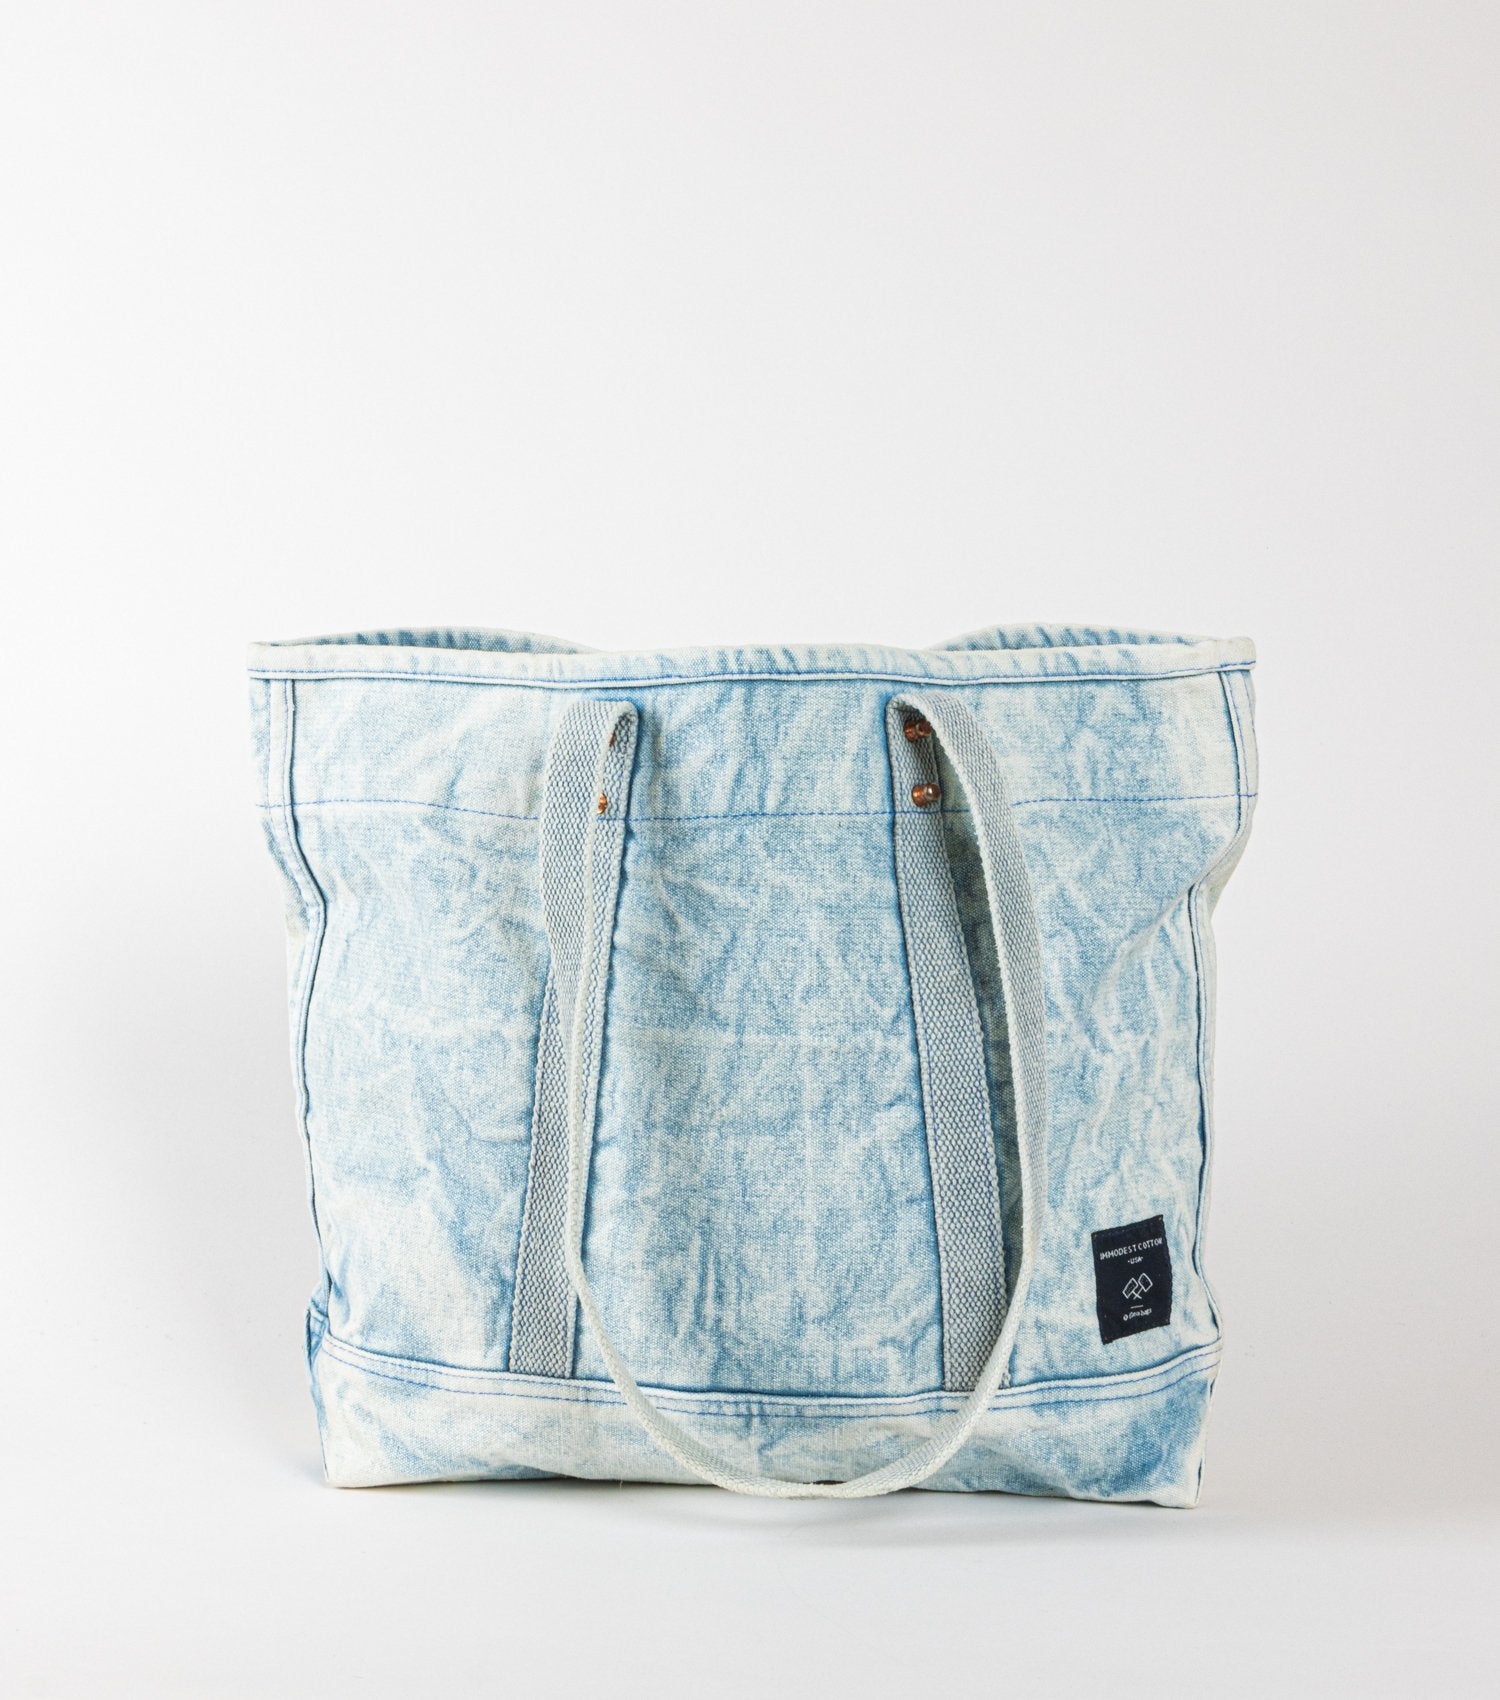 Immodest Cotton | Small East West Tote: Acid Wash